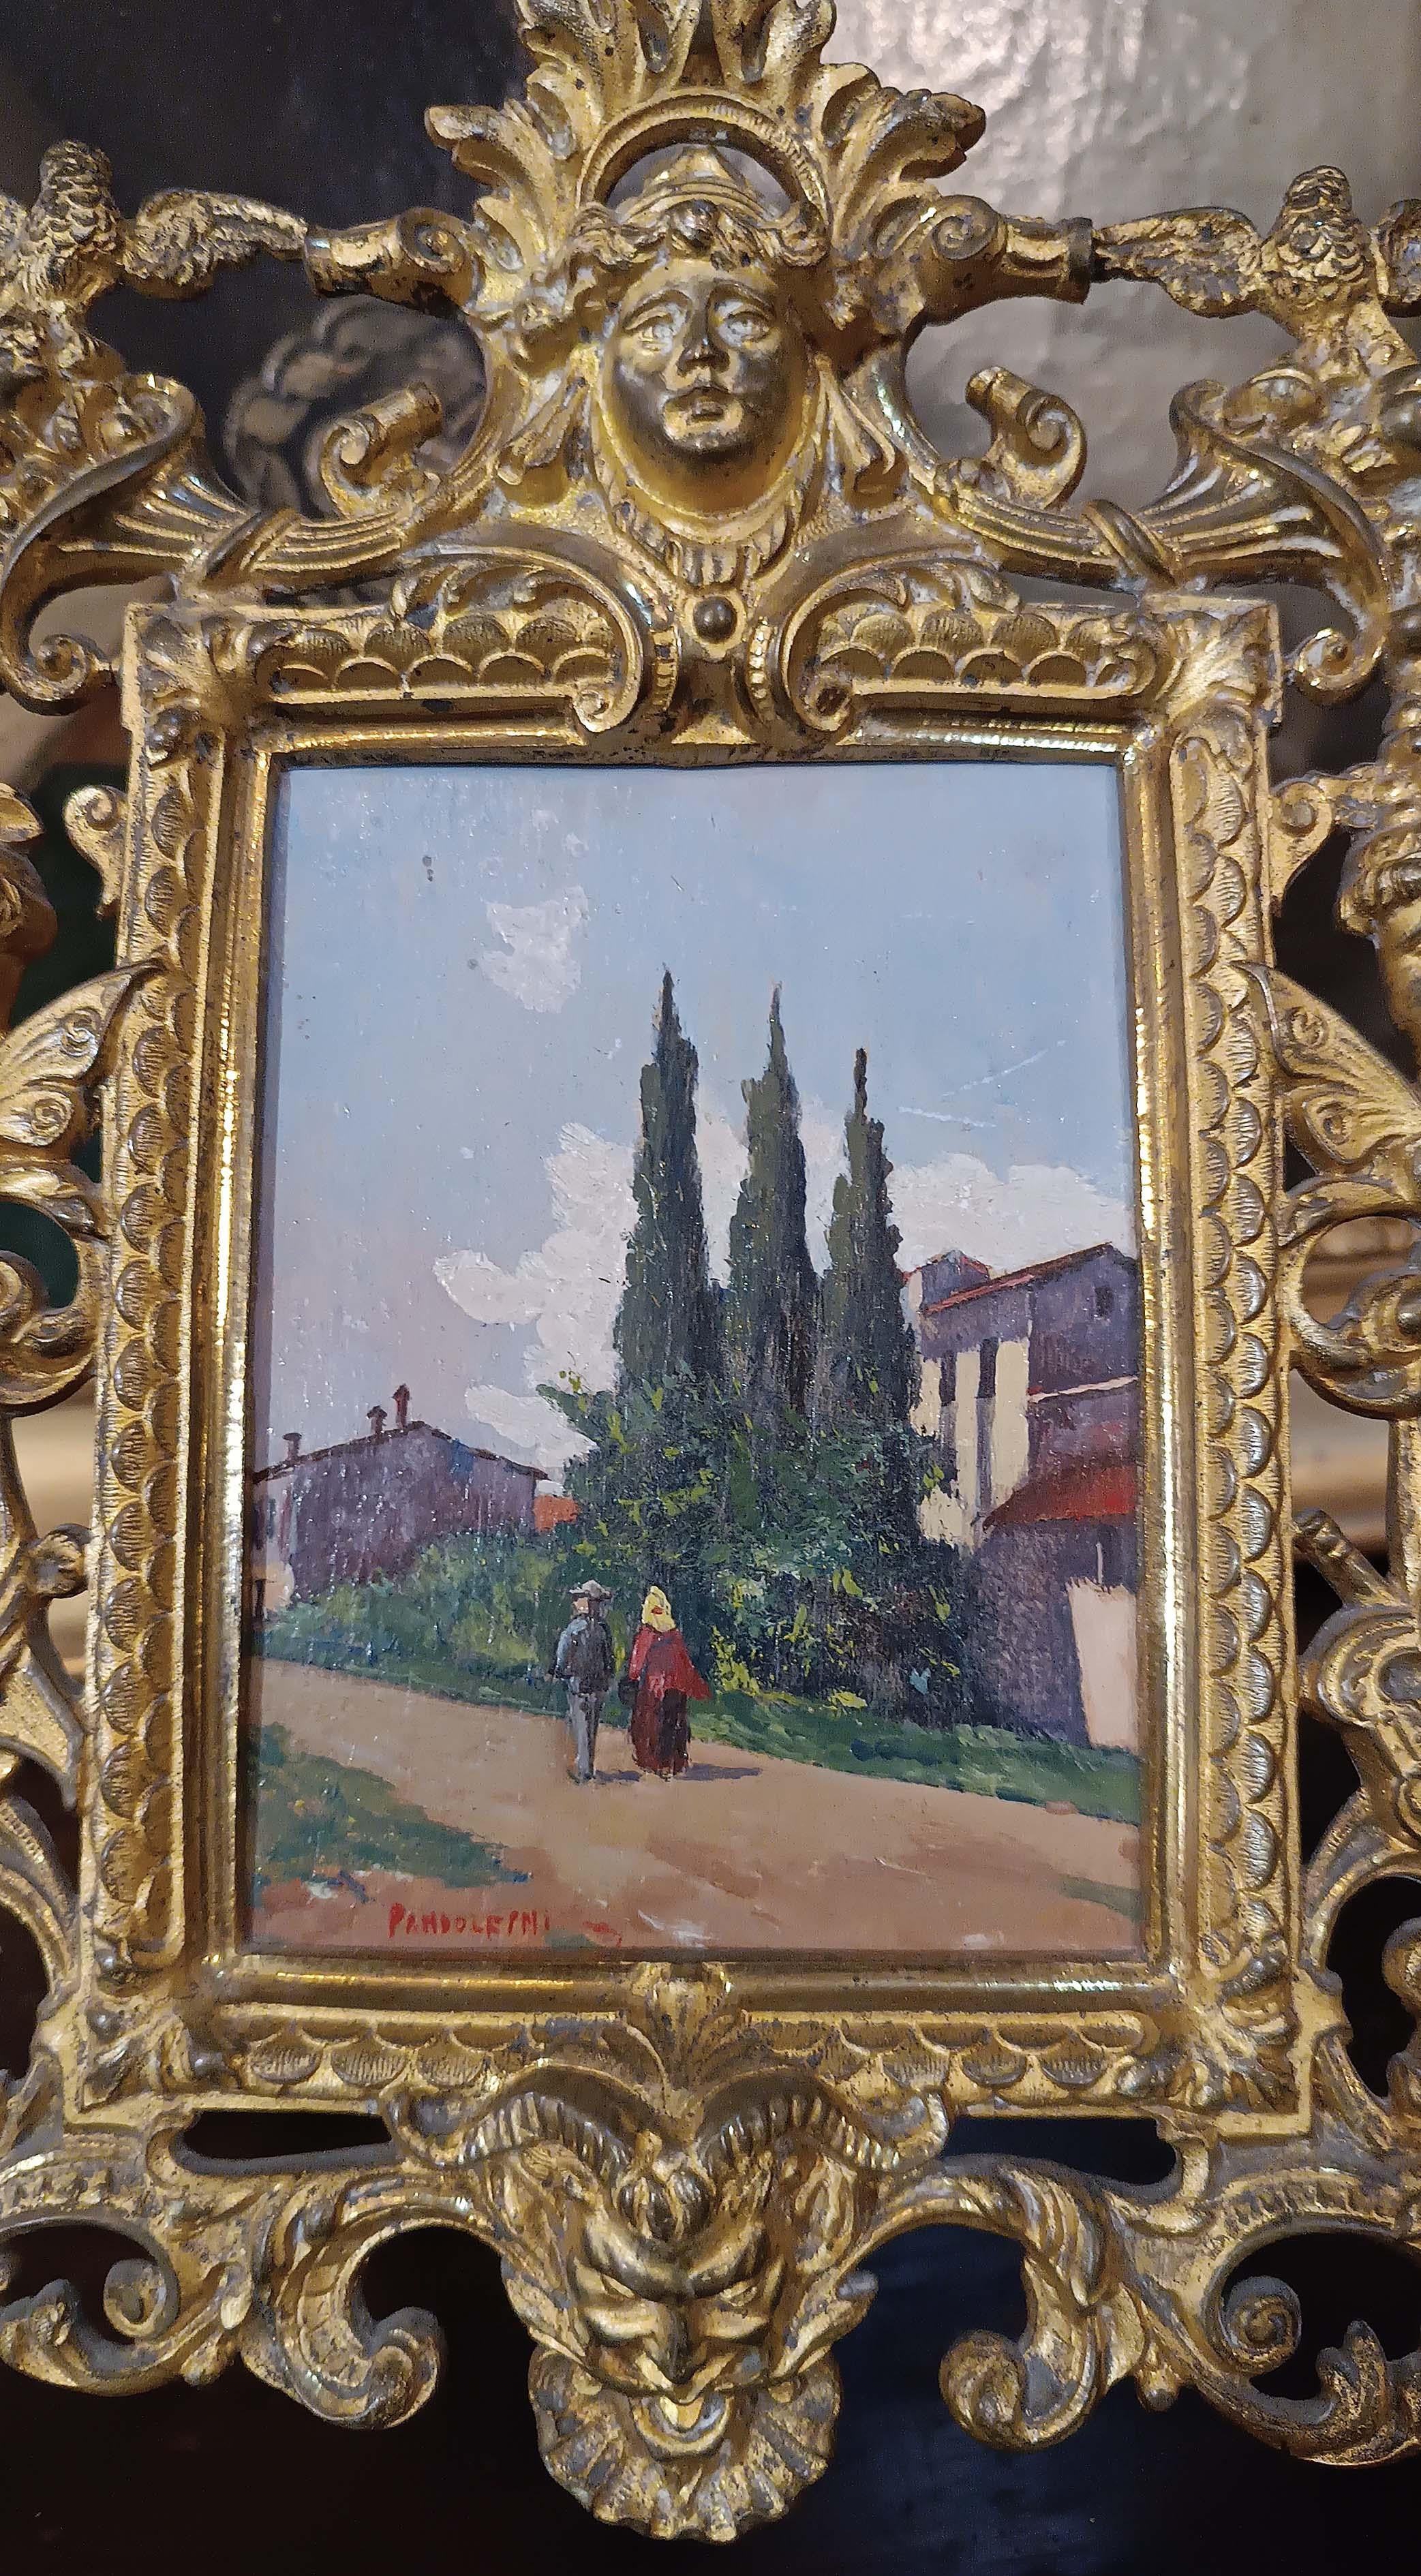 END OF THE 19th CENTURY GOLDEN BRONZE FRAME WITH SMALL PAINTING  For Sale 1